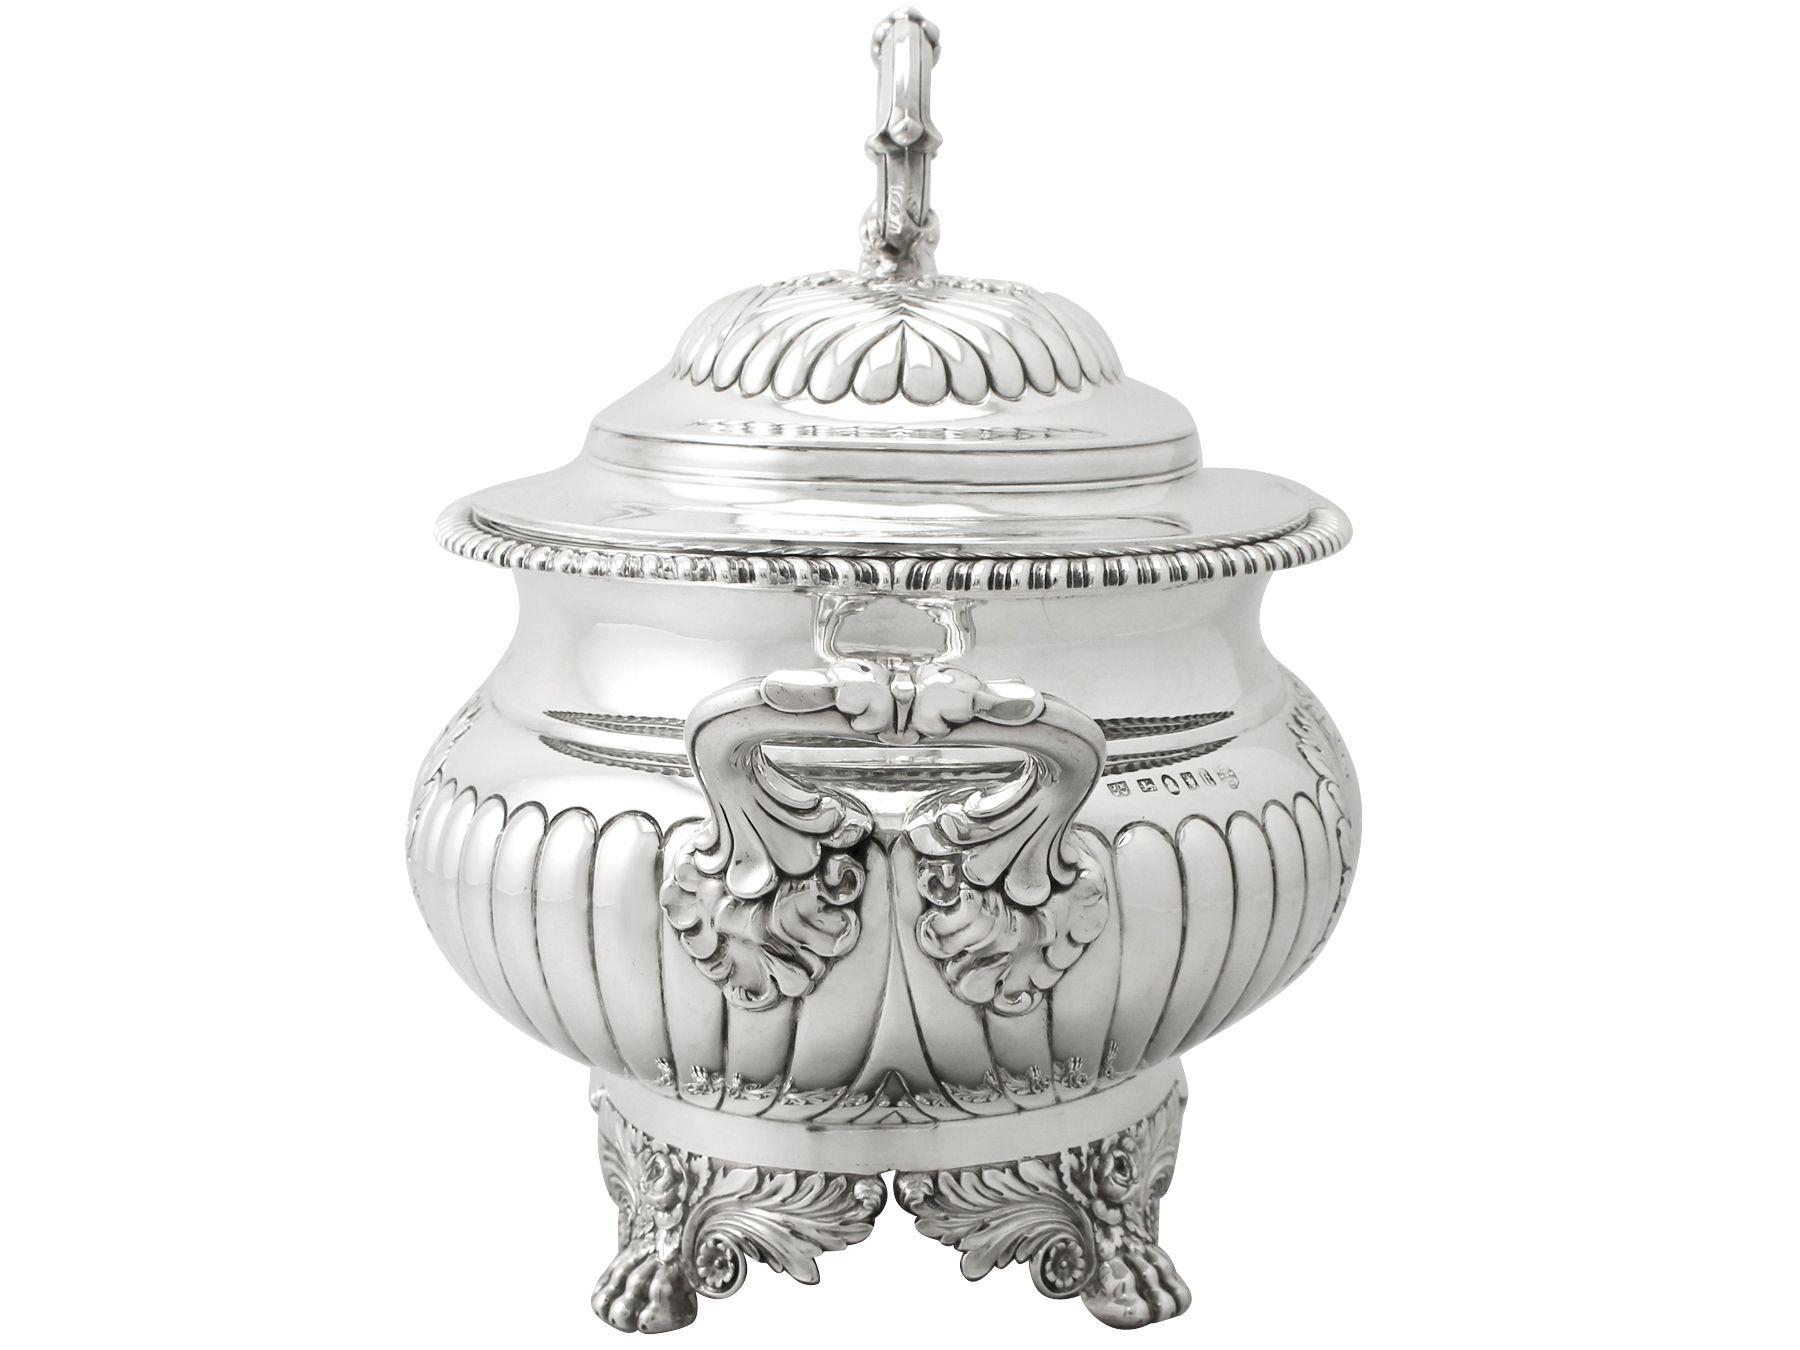 English Antique Sterling Silver Soup Tureen or Centerpiece For Sale